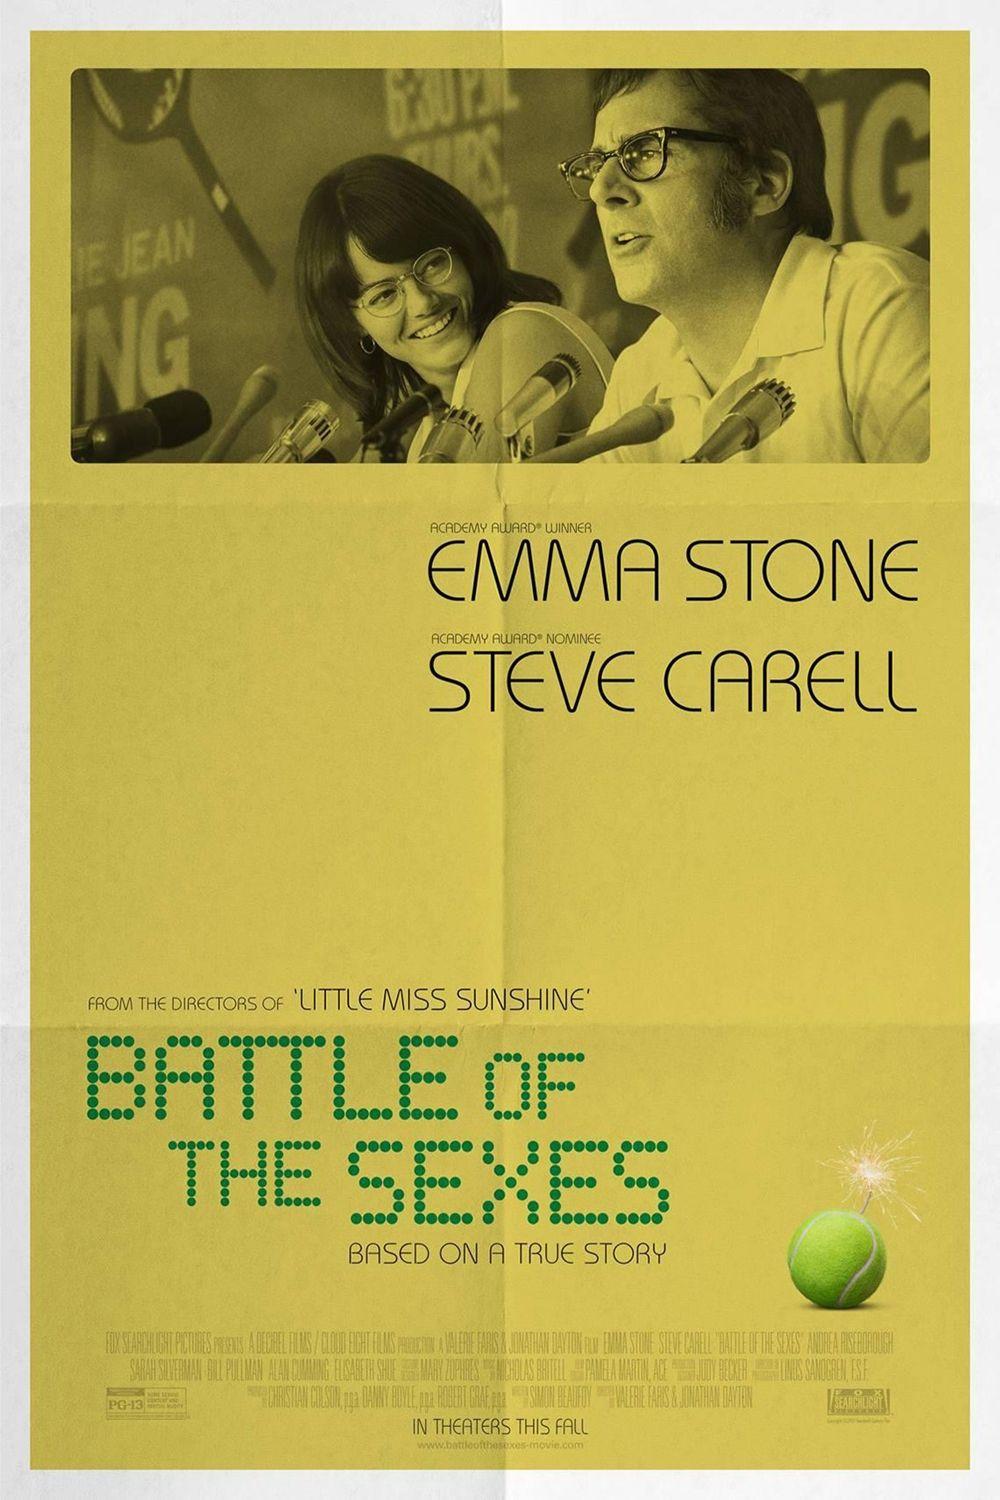 Battle Of The Sexes at an AMC Theatre near you